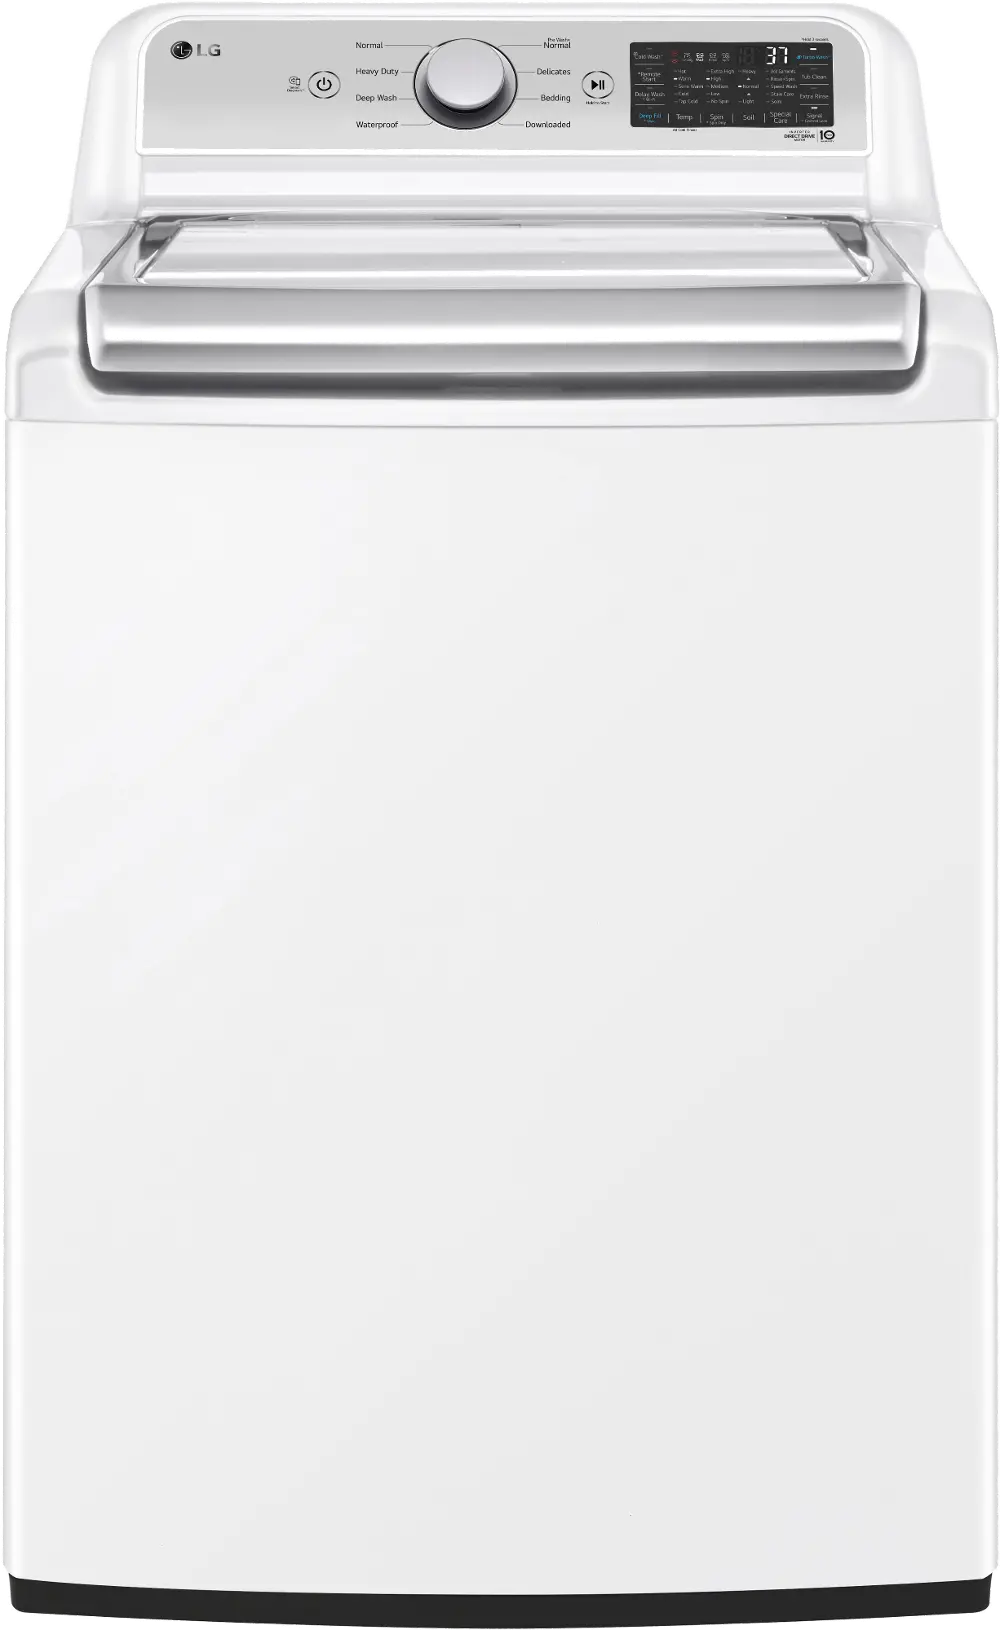 WT7405CW LG 5.3 cu ft Top Load Washer - White, 7405W-1